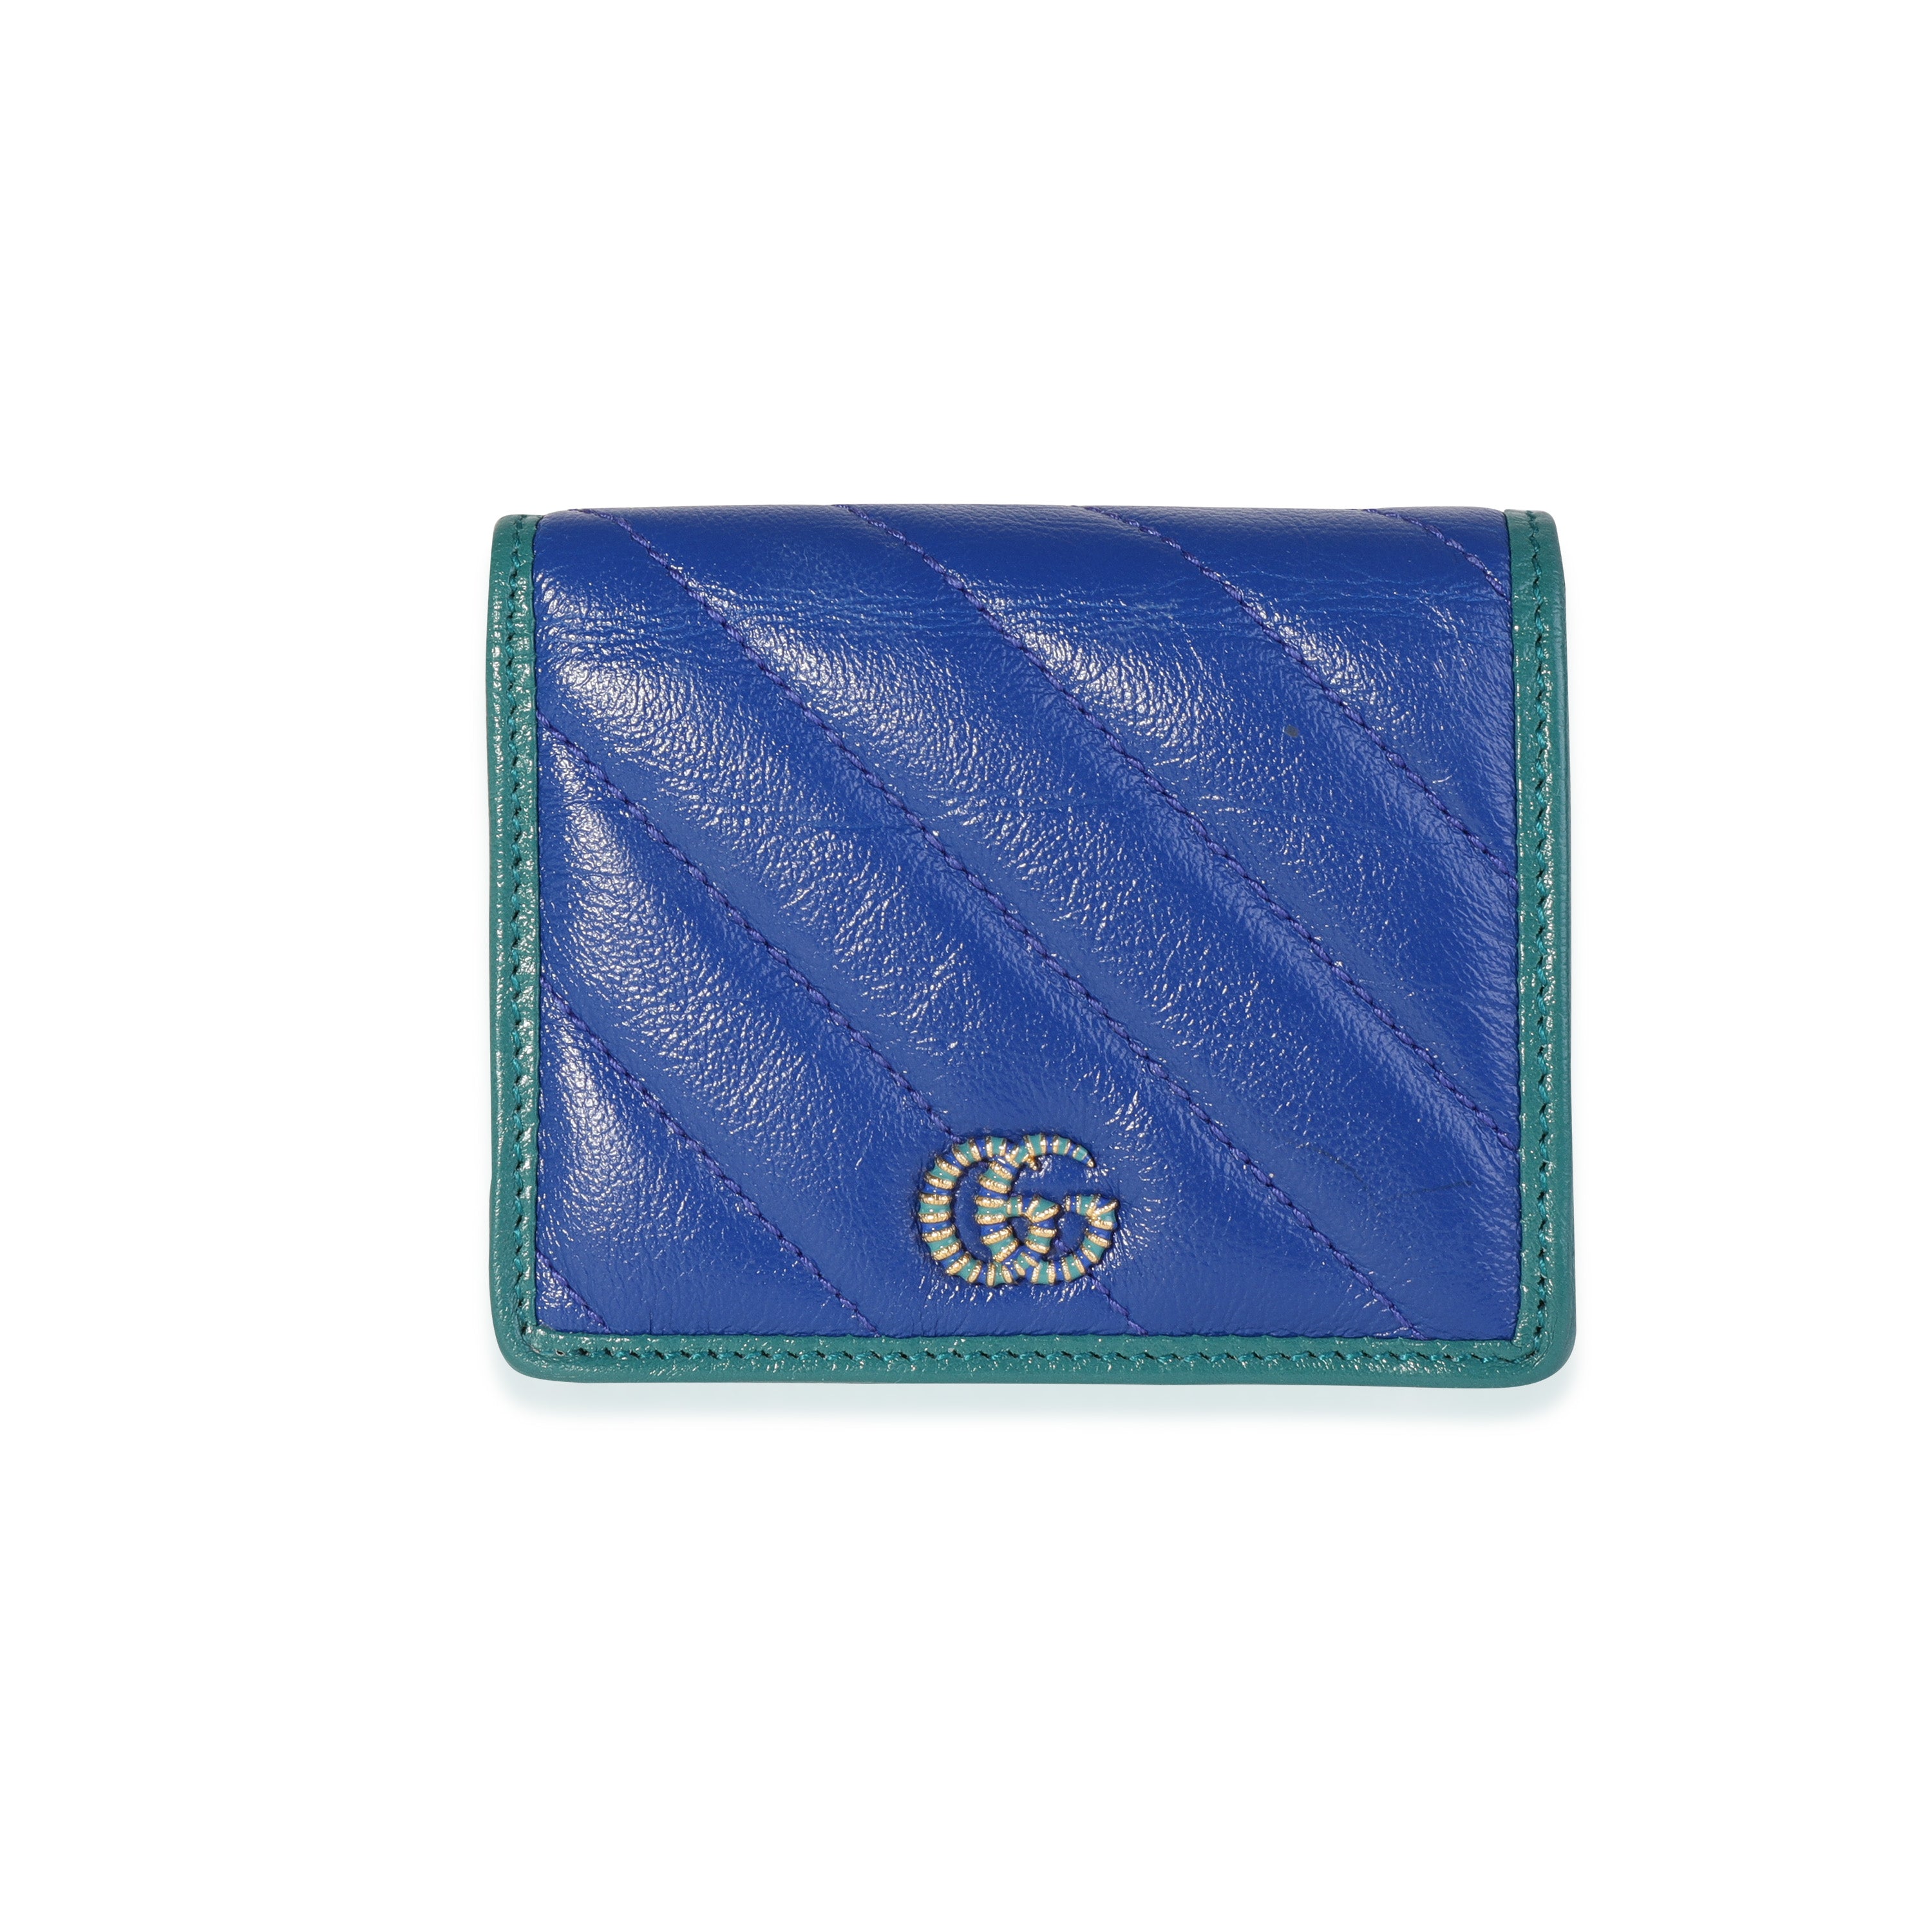 Old 1980s Vintage Gucci Small Trifold Wallet Blue Canvas Mint 